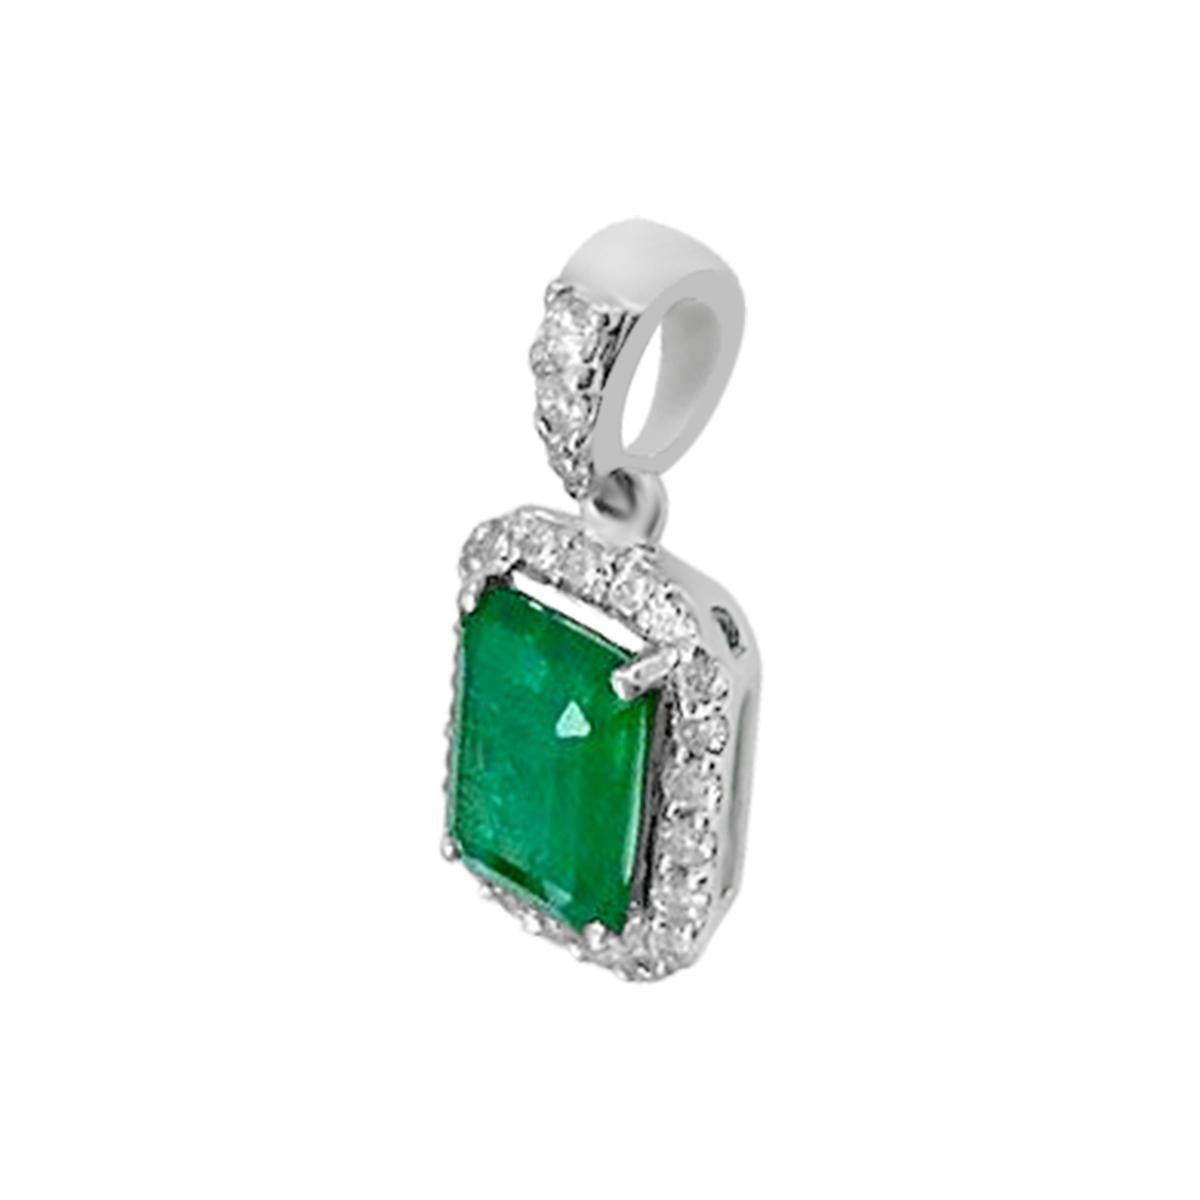 Sparkle From Night To Day With This Emerald Pendant.
The Beautiful Emerald Pendant Features A Elegant 7x5mm Emerald Octagon Shaped Gemstone And Diamonds. This Beautiful Piece Is Settled In 14k White Gold Makes It A Real Sparkling